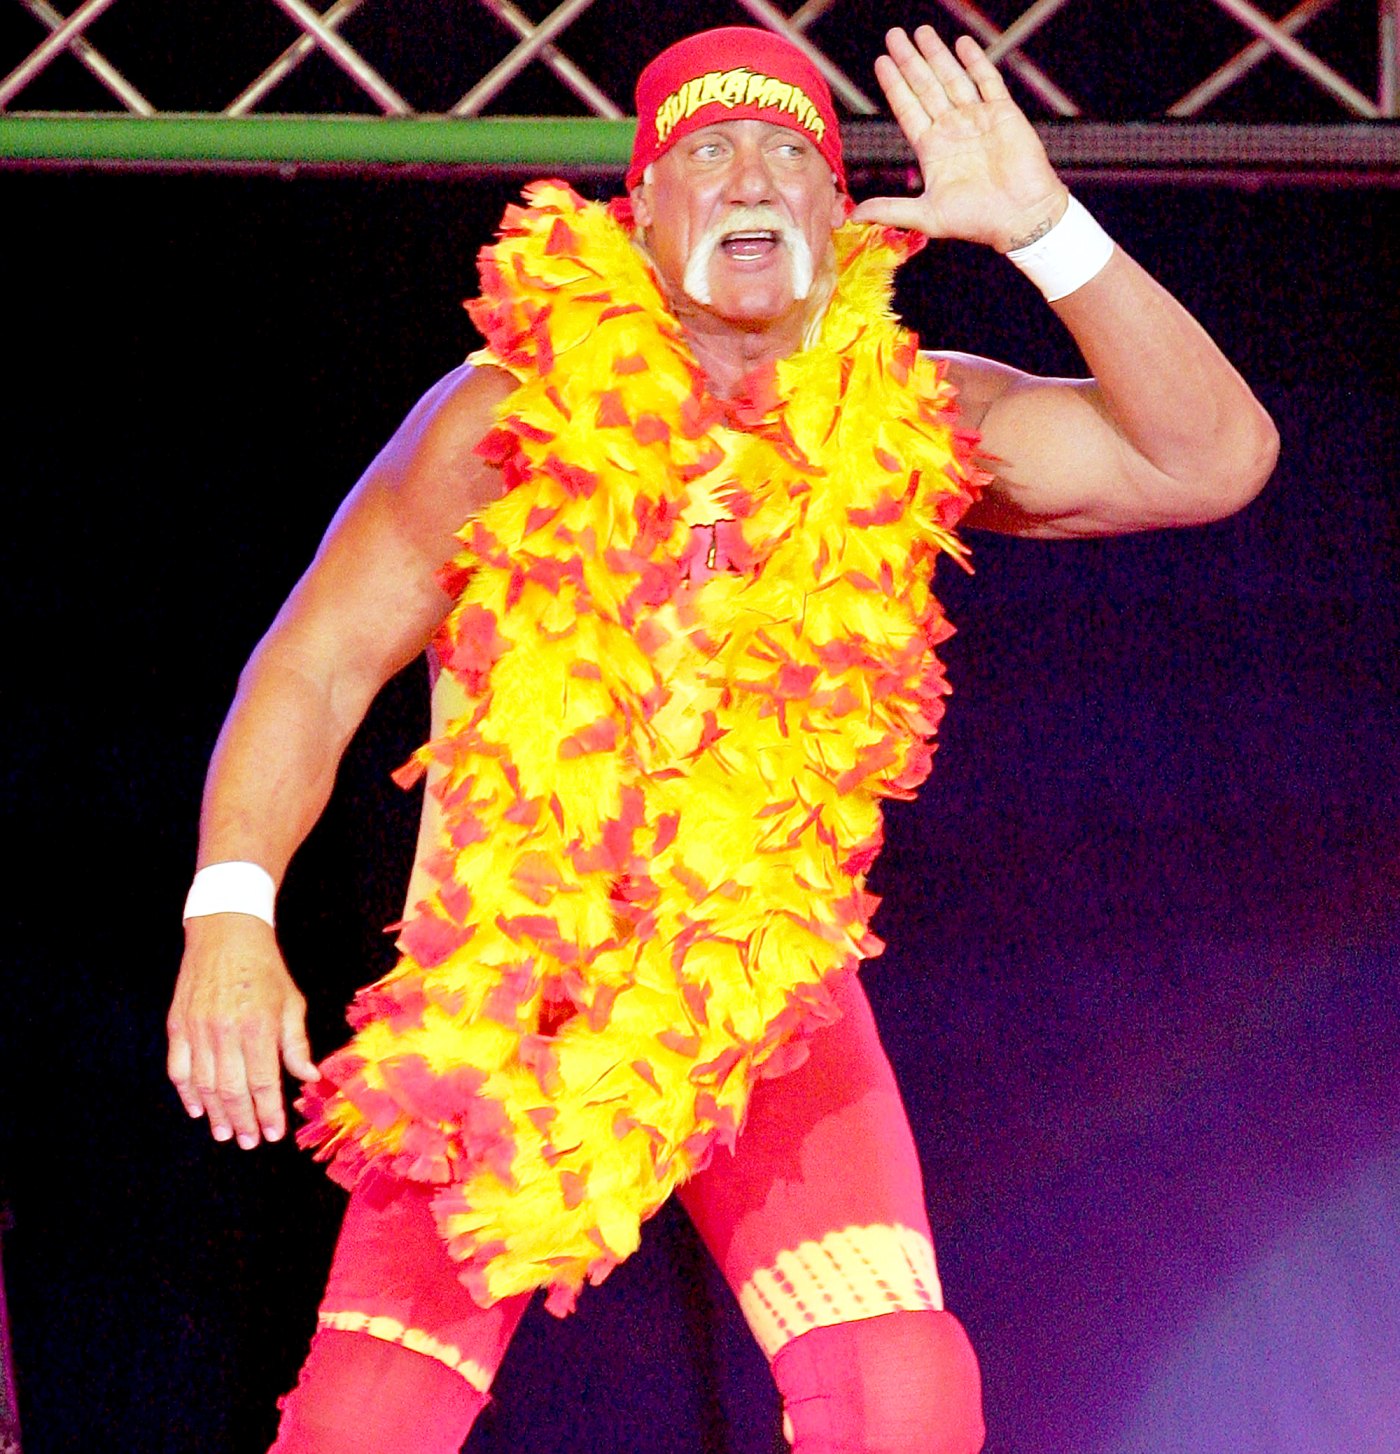 Gawker Media Files for Bankruptcy After Hulk Hogan Lawsuit Judgment ...